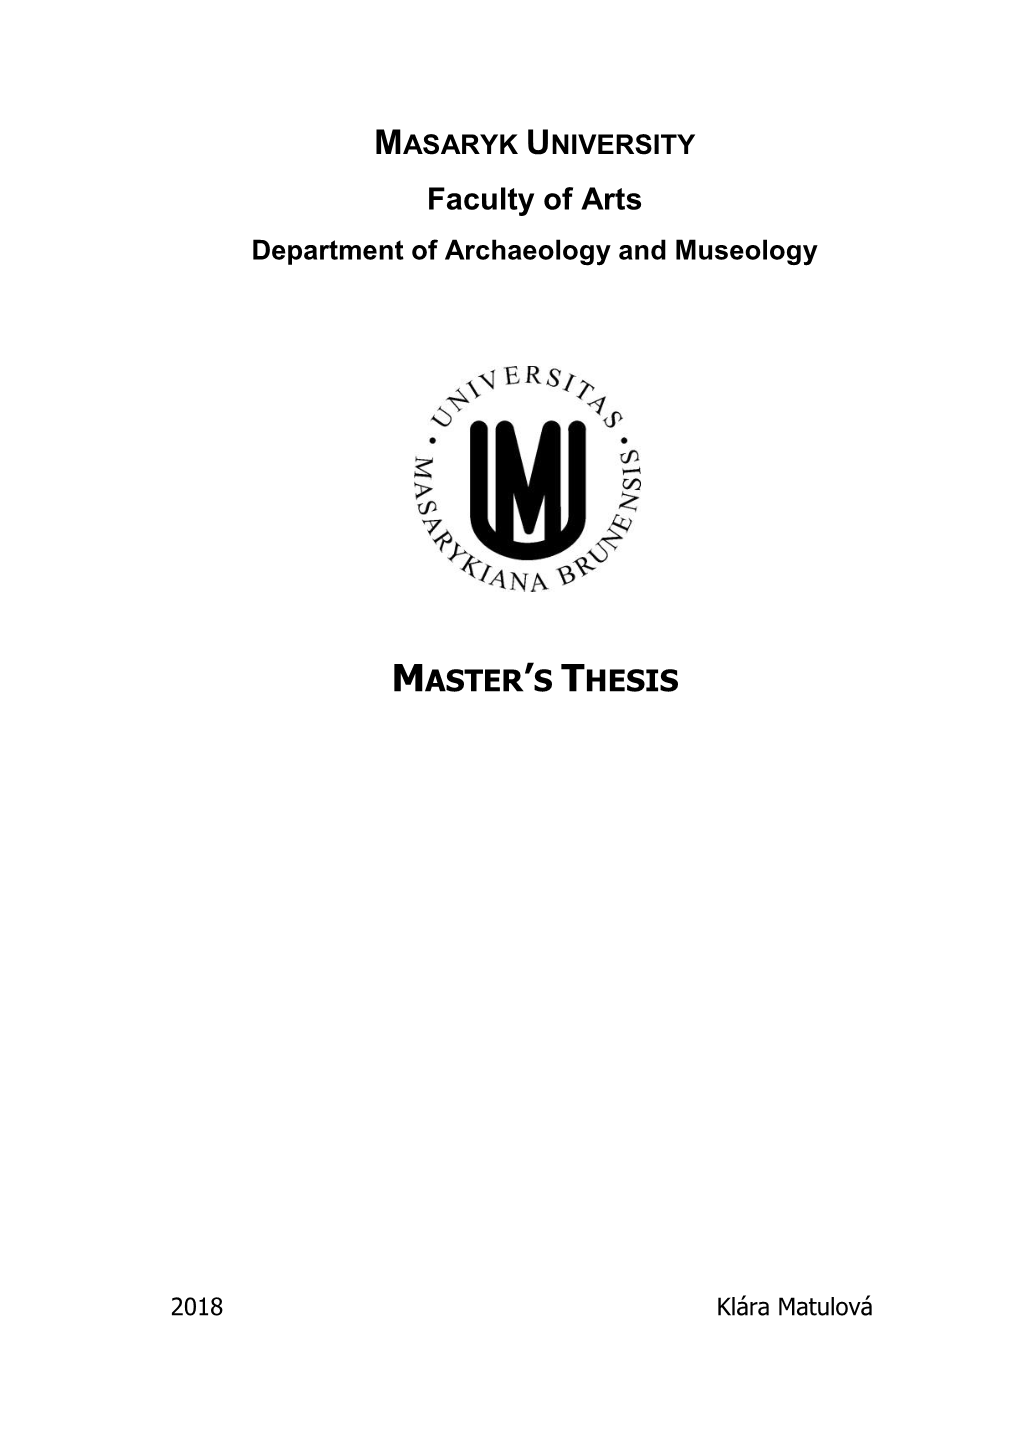 MASARYK UNIVERSITY Faculty of Arts Department of Archaeology and Museology